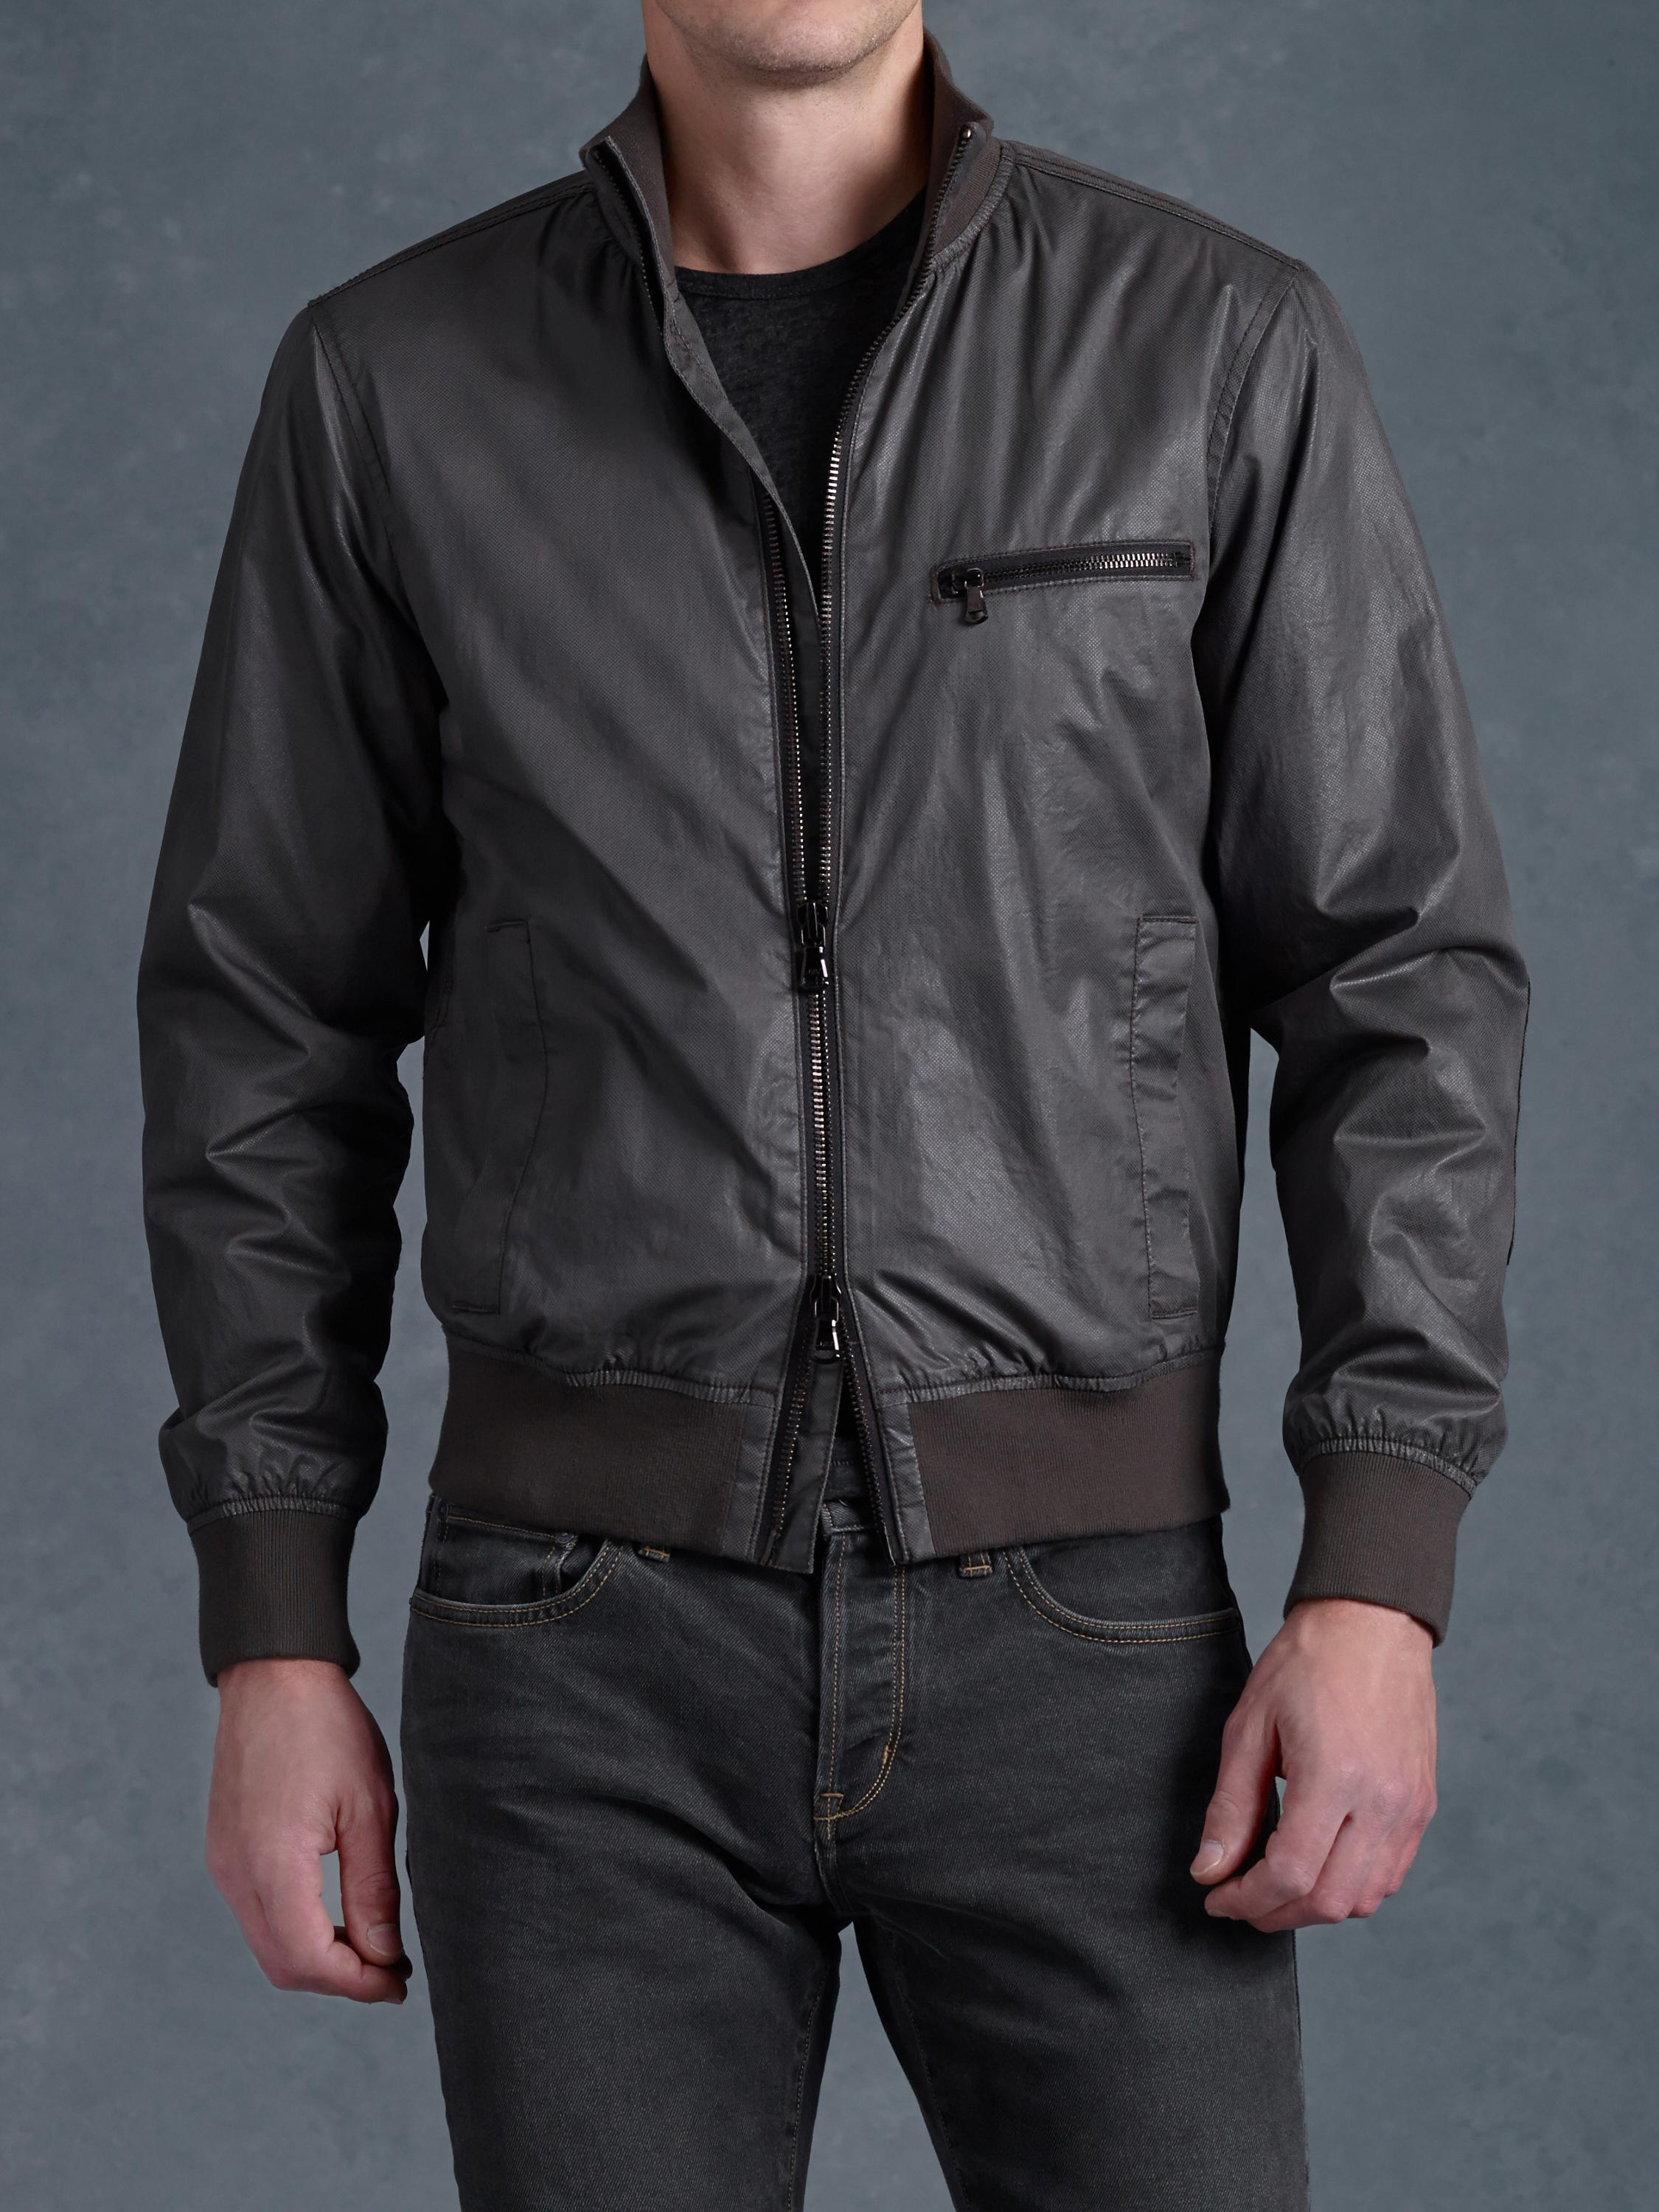 One Jacket, Two Spies – The John Varvatos Suede Racer Jacket